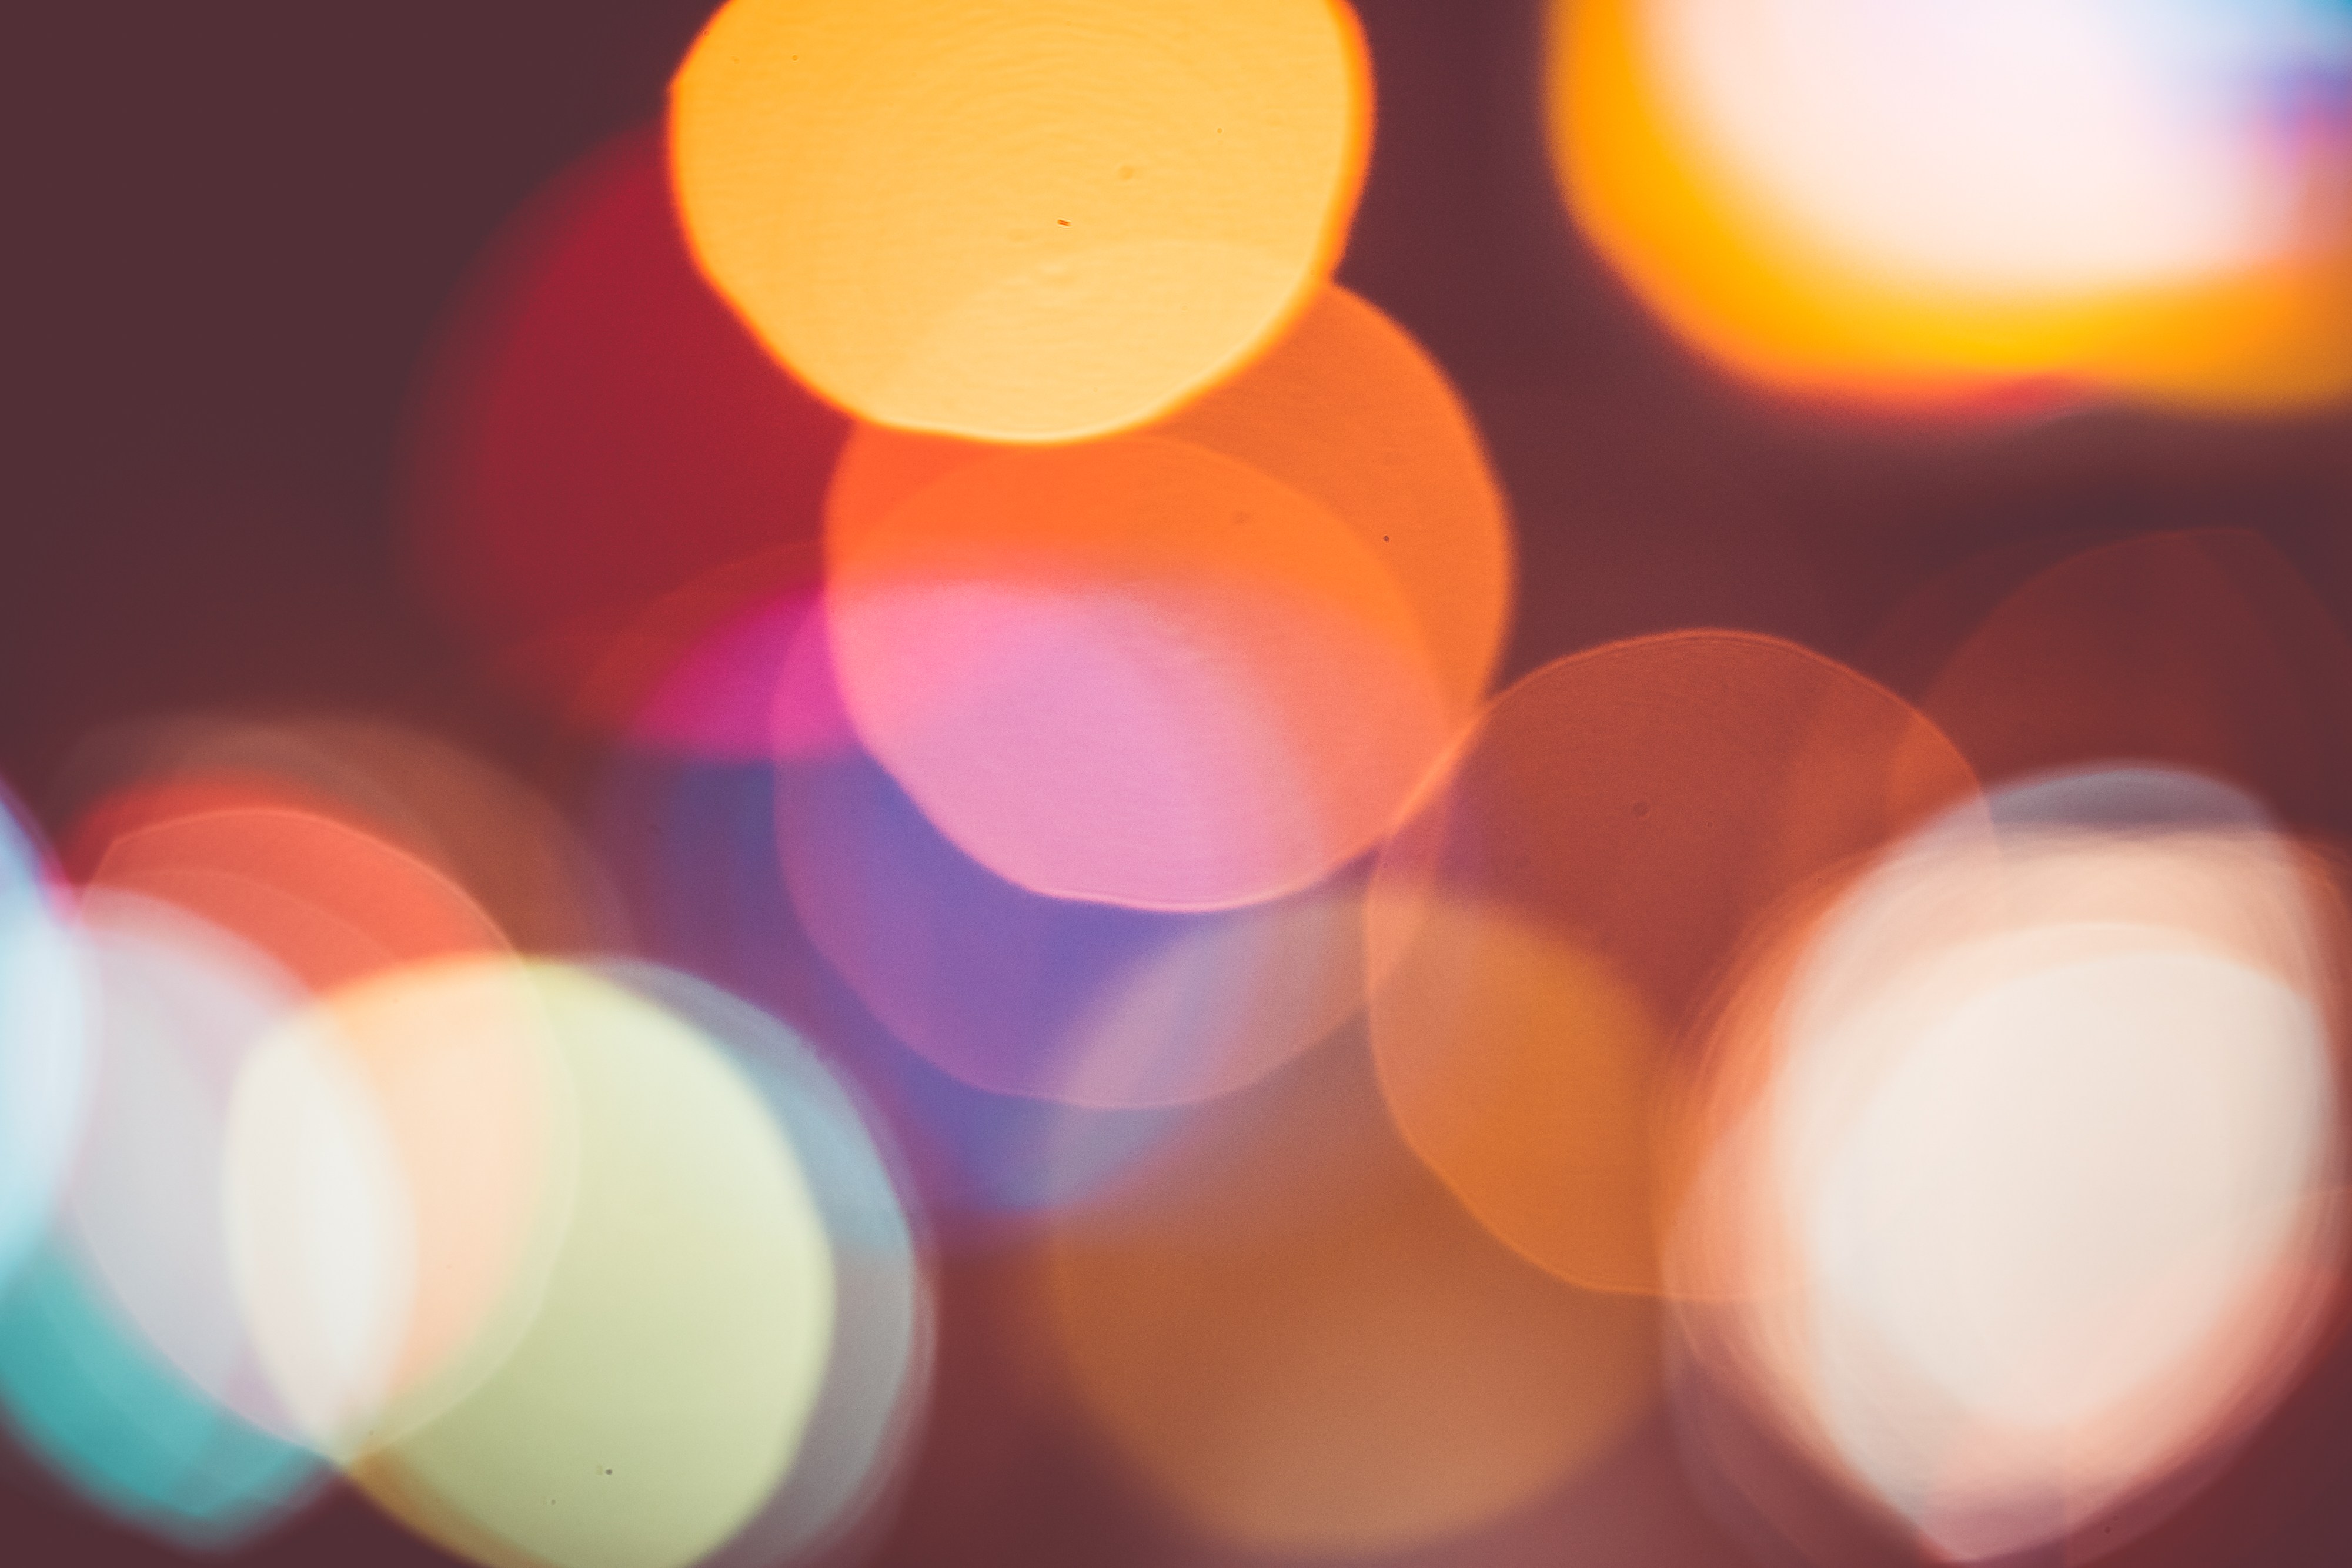 Big and Real Light Abtract Colorful Bokeh Background Free Stock Photo |  picjumbo